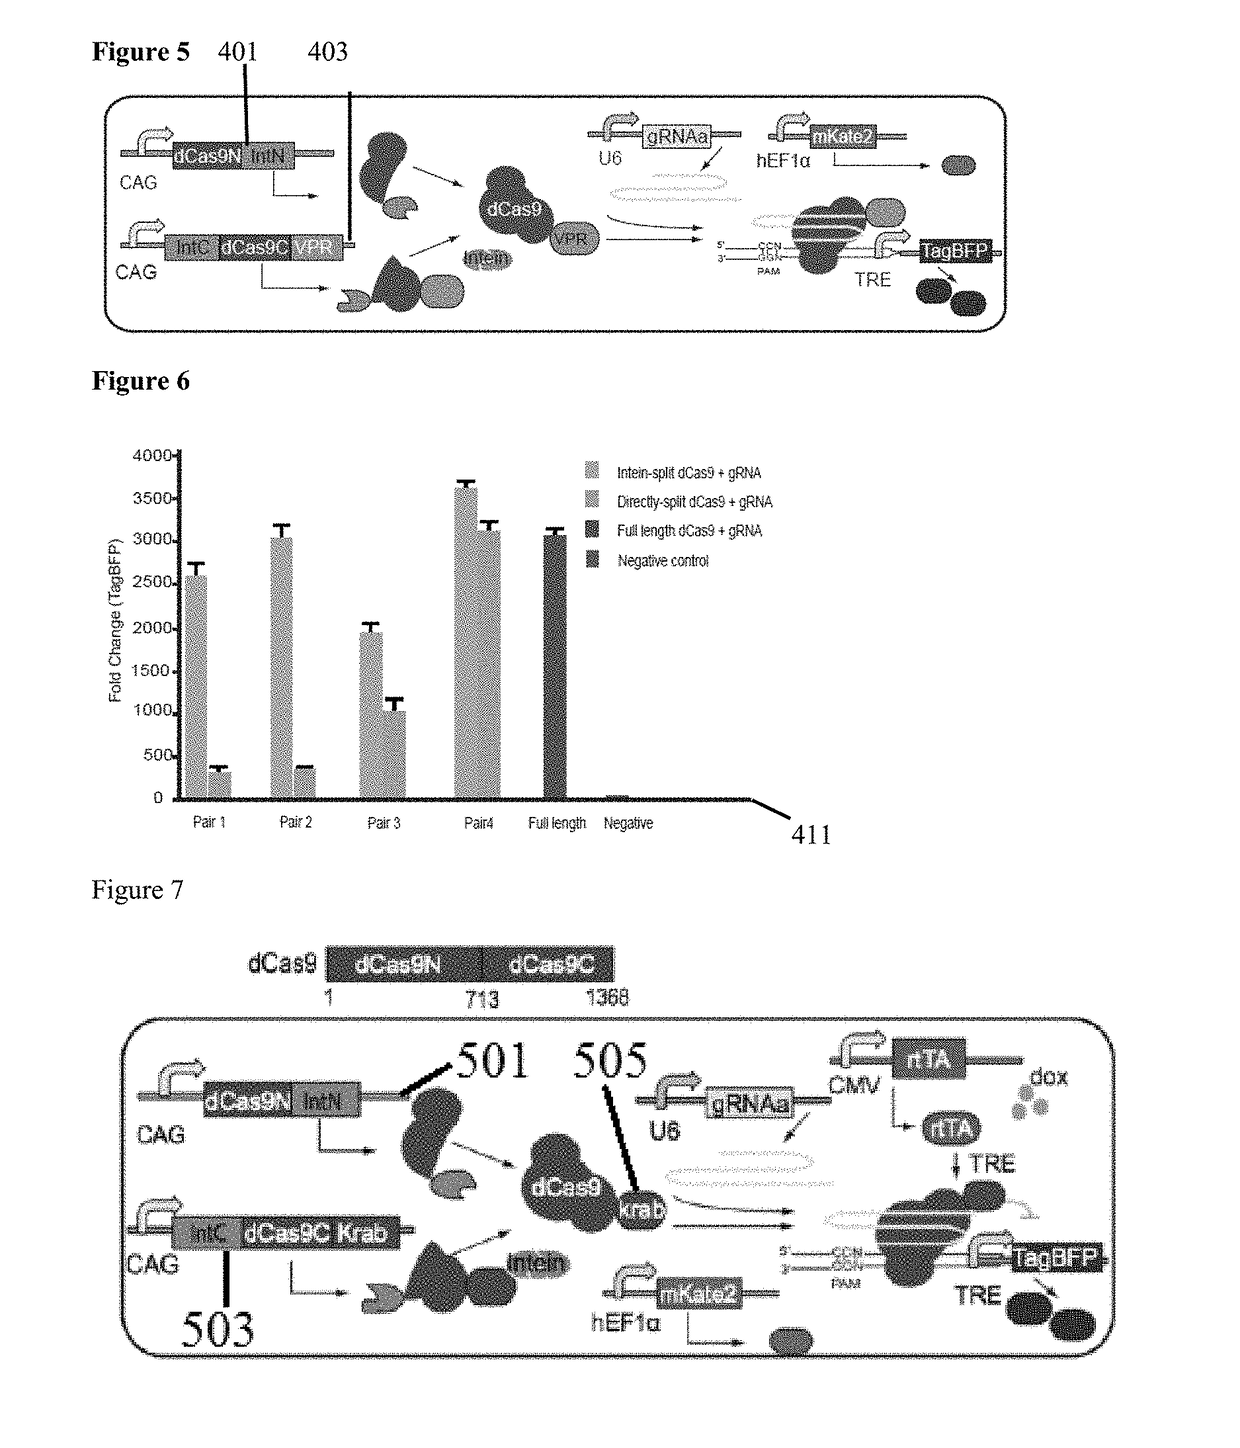 Genetic indicator and control system and method utilizing split Cas9/CRISPR domains for transcriptional control in eukaryotic cell lines